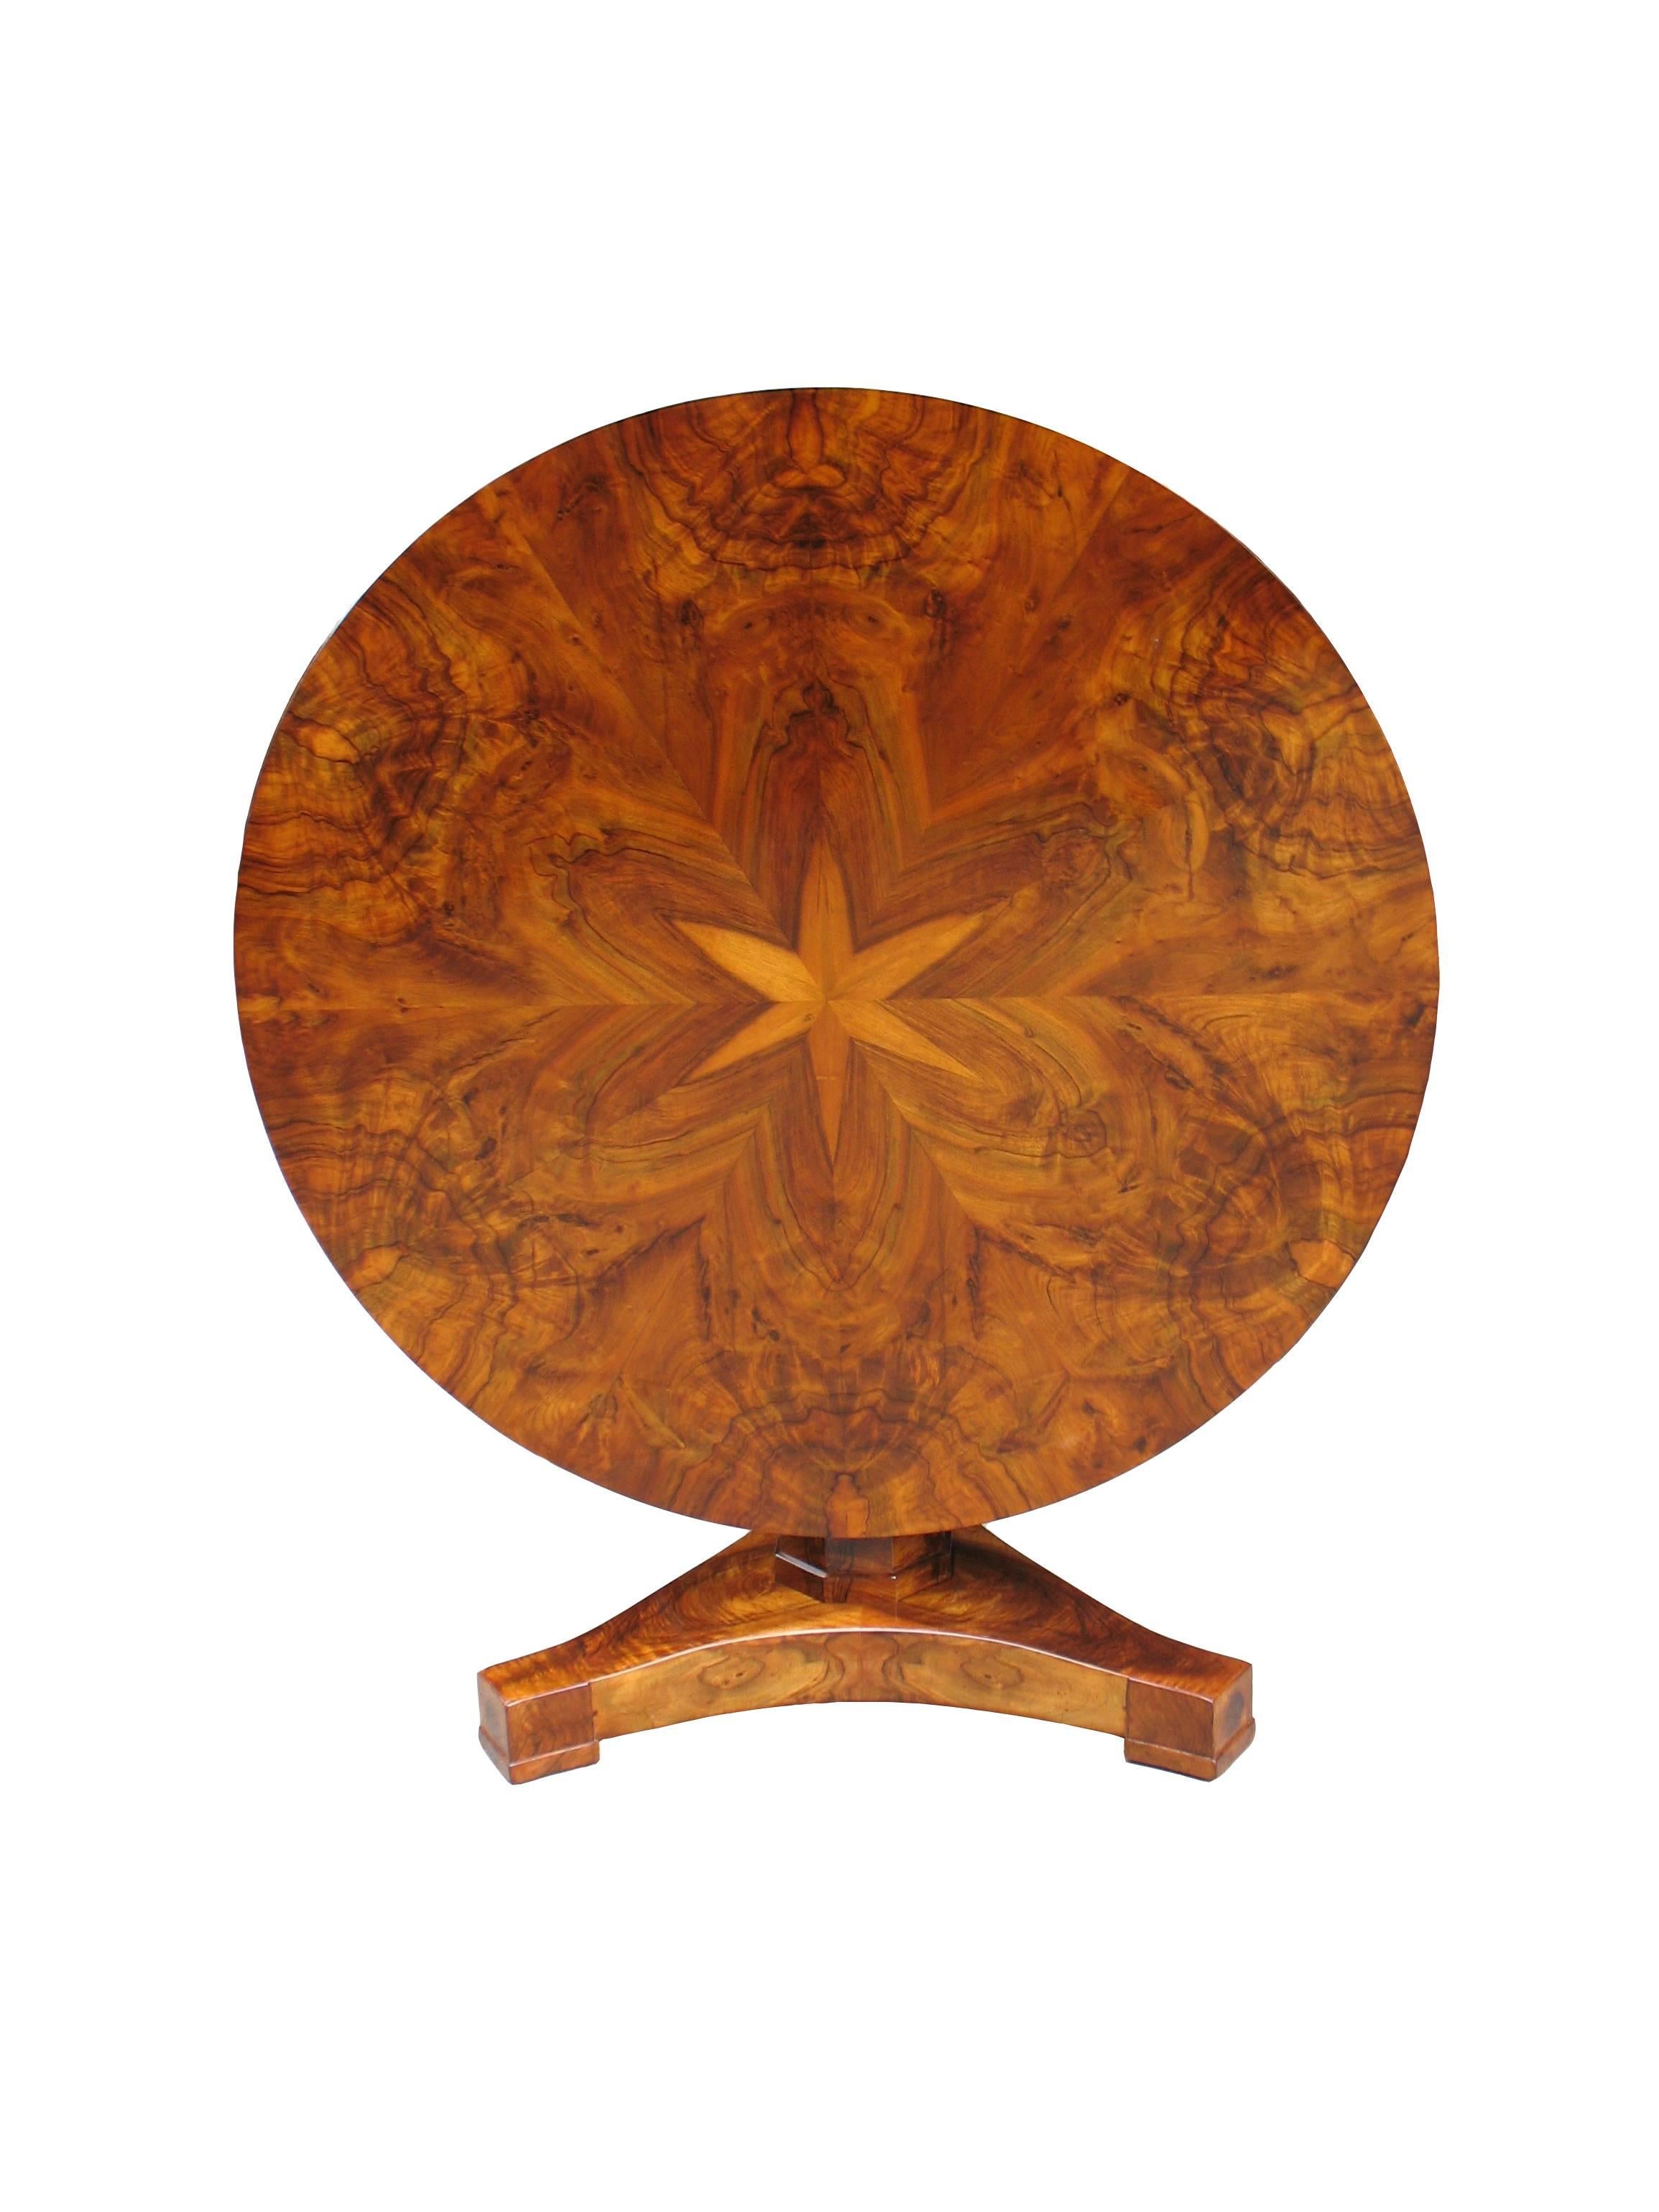 This Biedermeier tilt-top center table in walnut veneered on pine is an exemplary piece of the highest quality of cabinetmakers craftsmanship.
The walnut root-head veneers on table-top couldn't have been better layed out: inside forming a star and